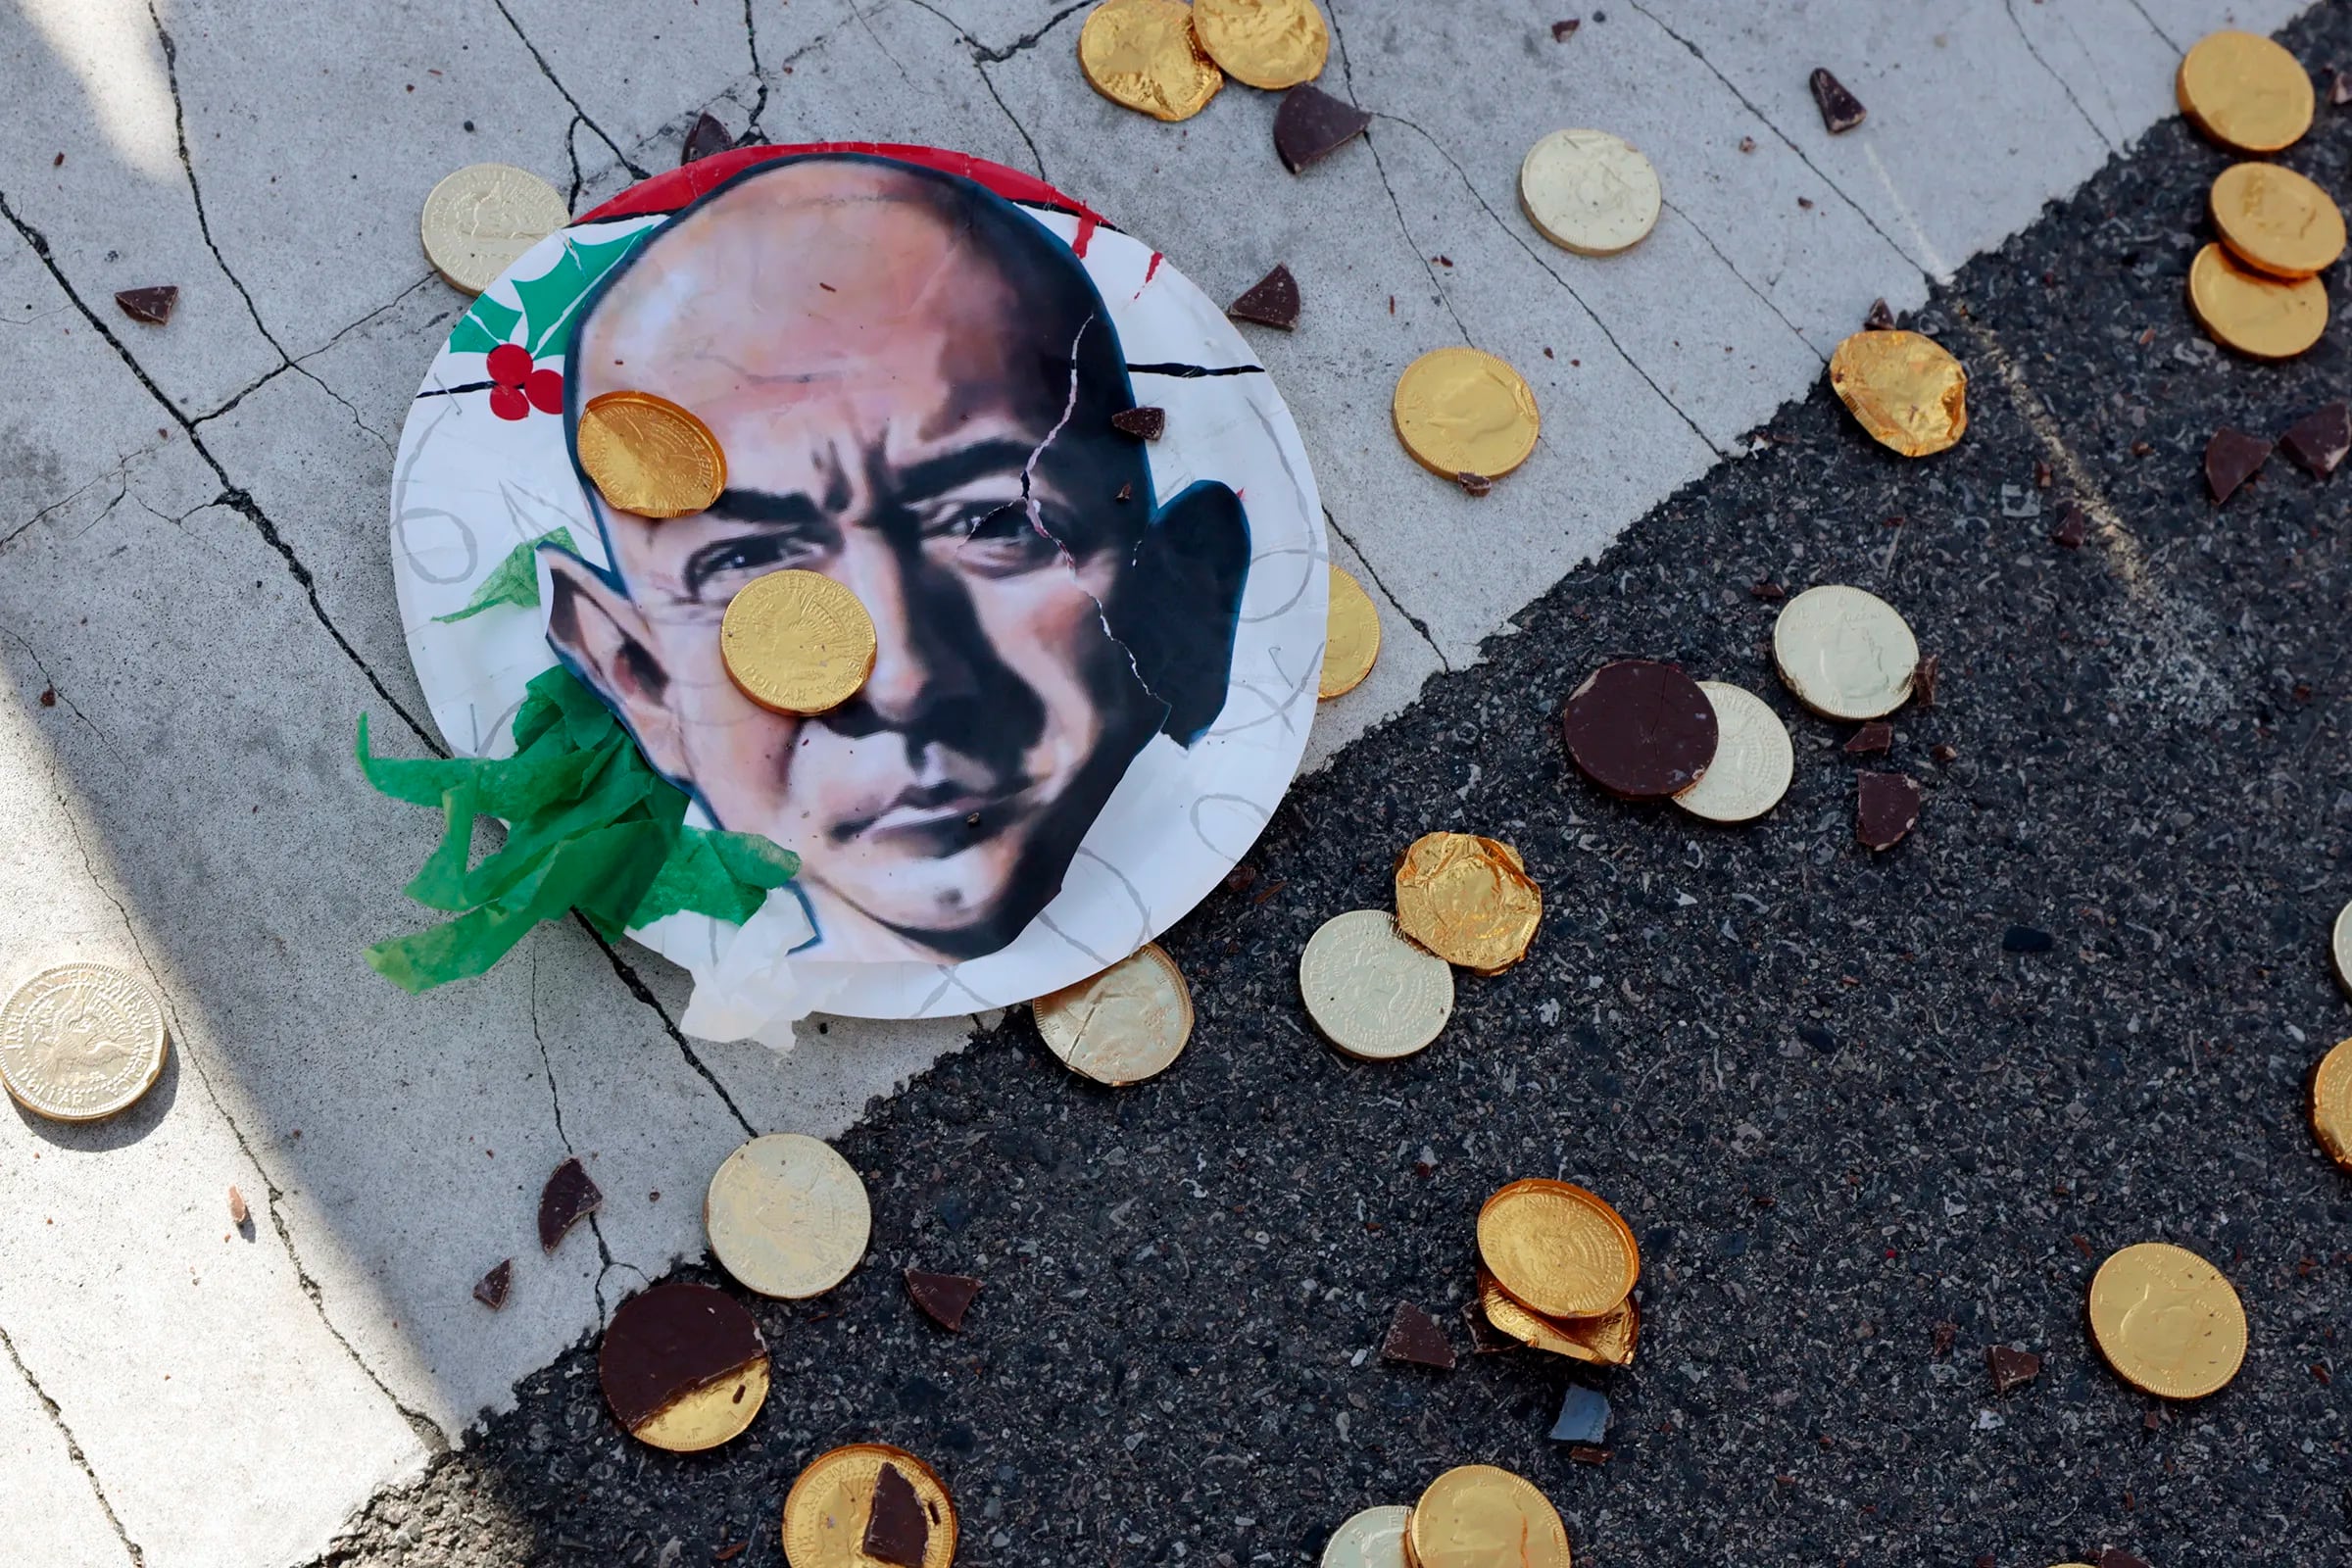 A ripped Jeff Bezos photo and milk chocolate coins from a piñata of Bezos that was smashed during a march and rally in Philadelphia last month.